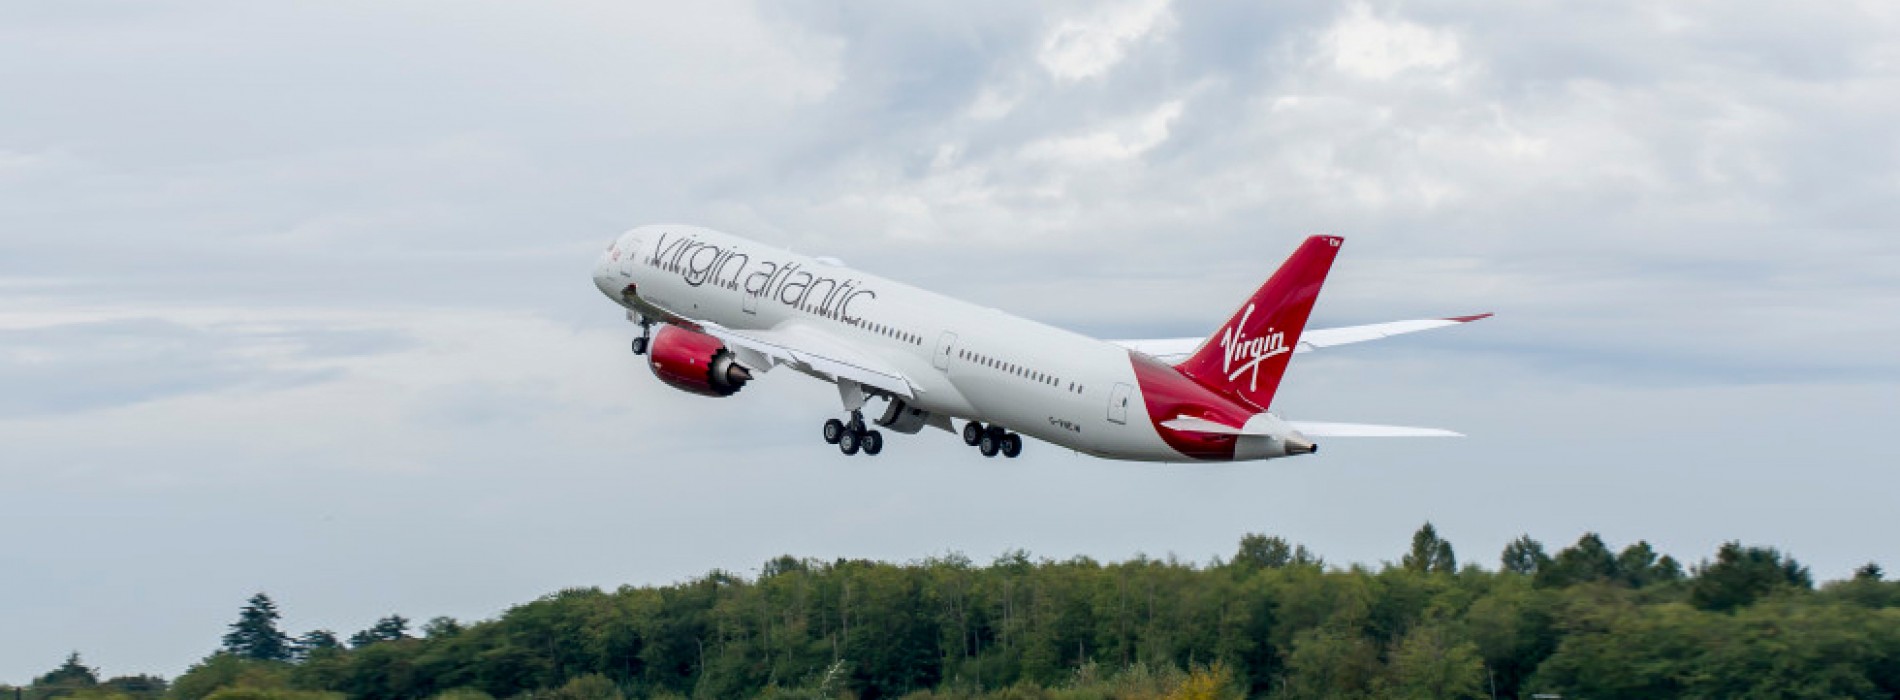 Virgin Atlantic becomes the first airline in Europe to be fully WiFi connected